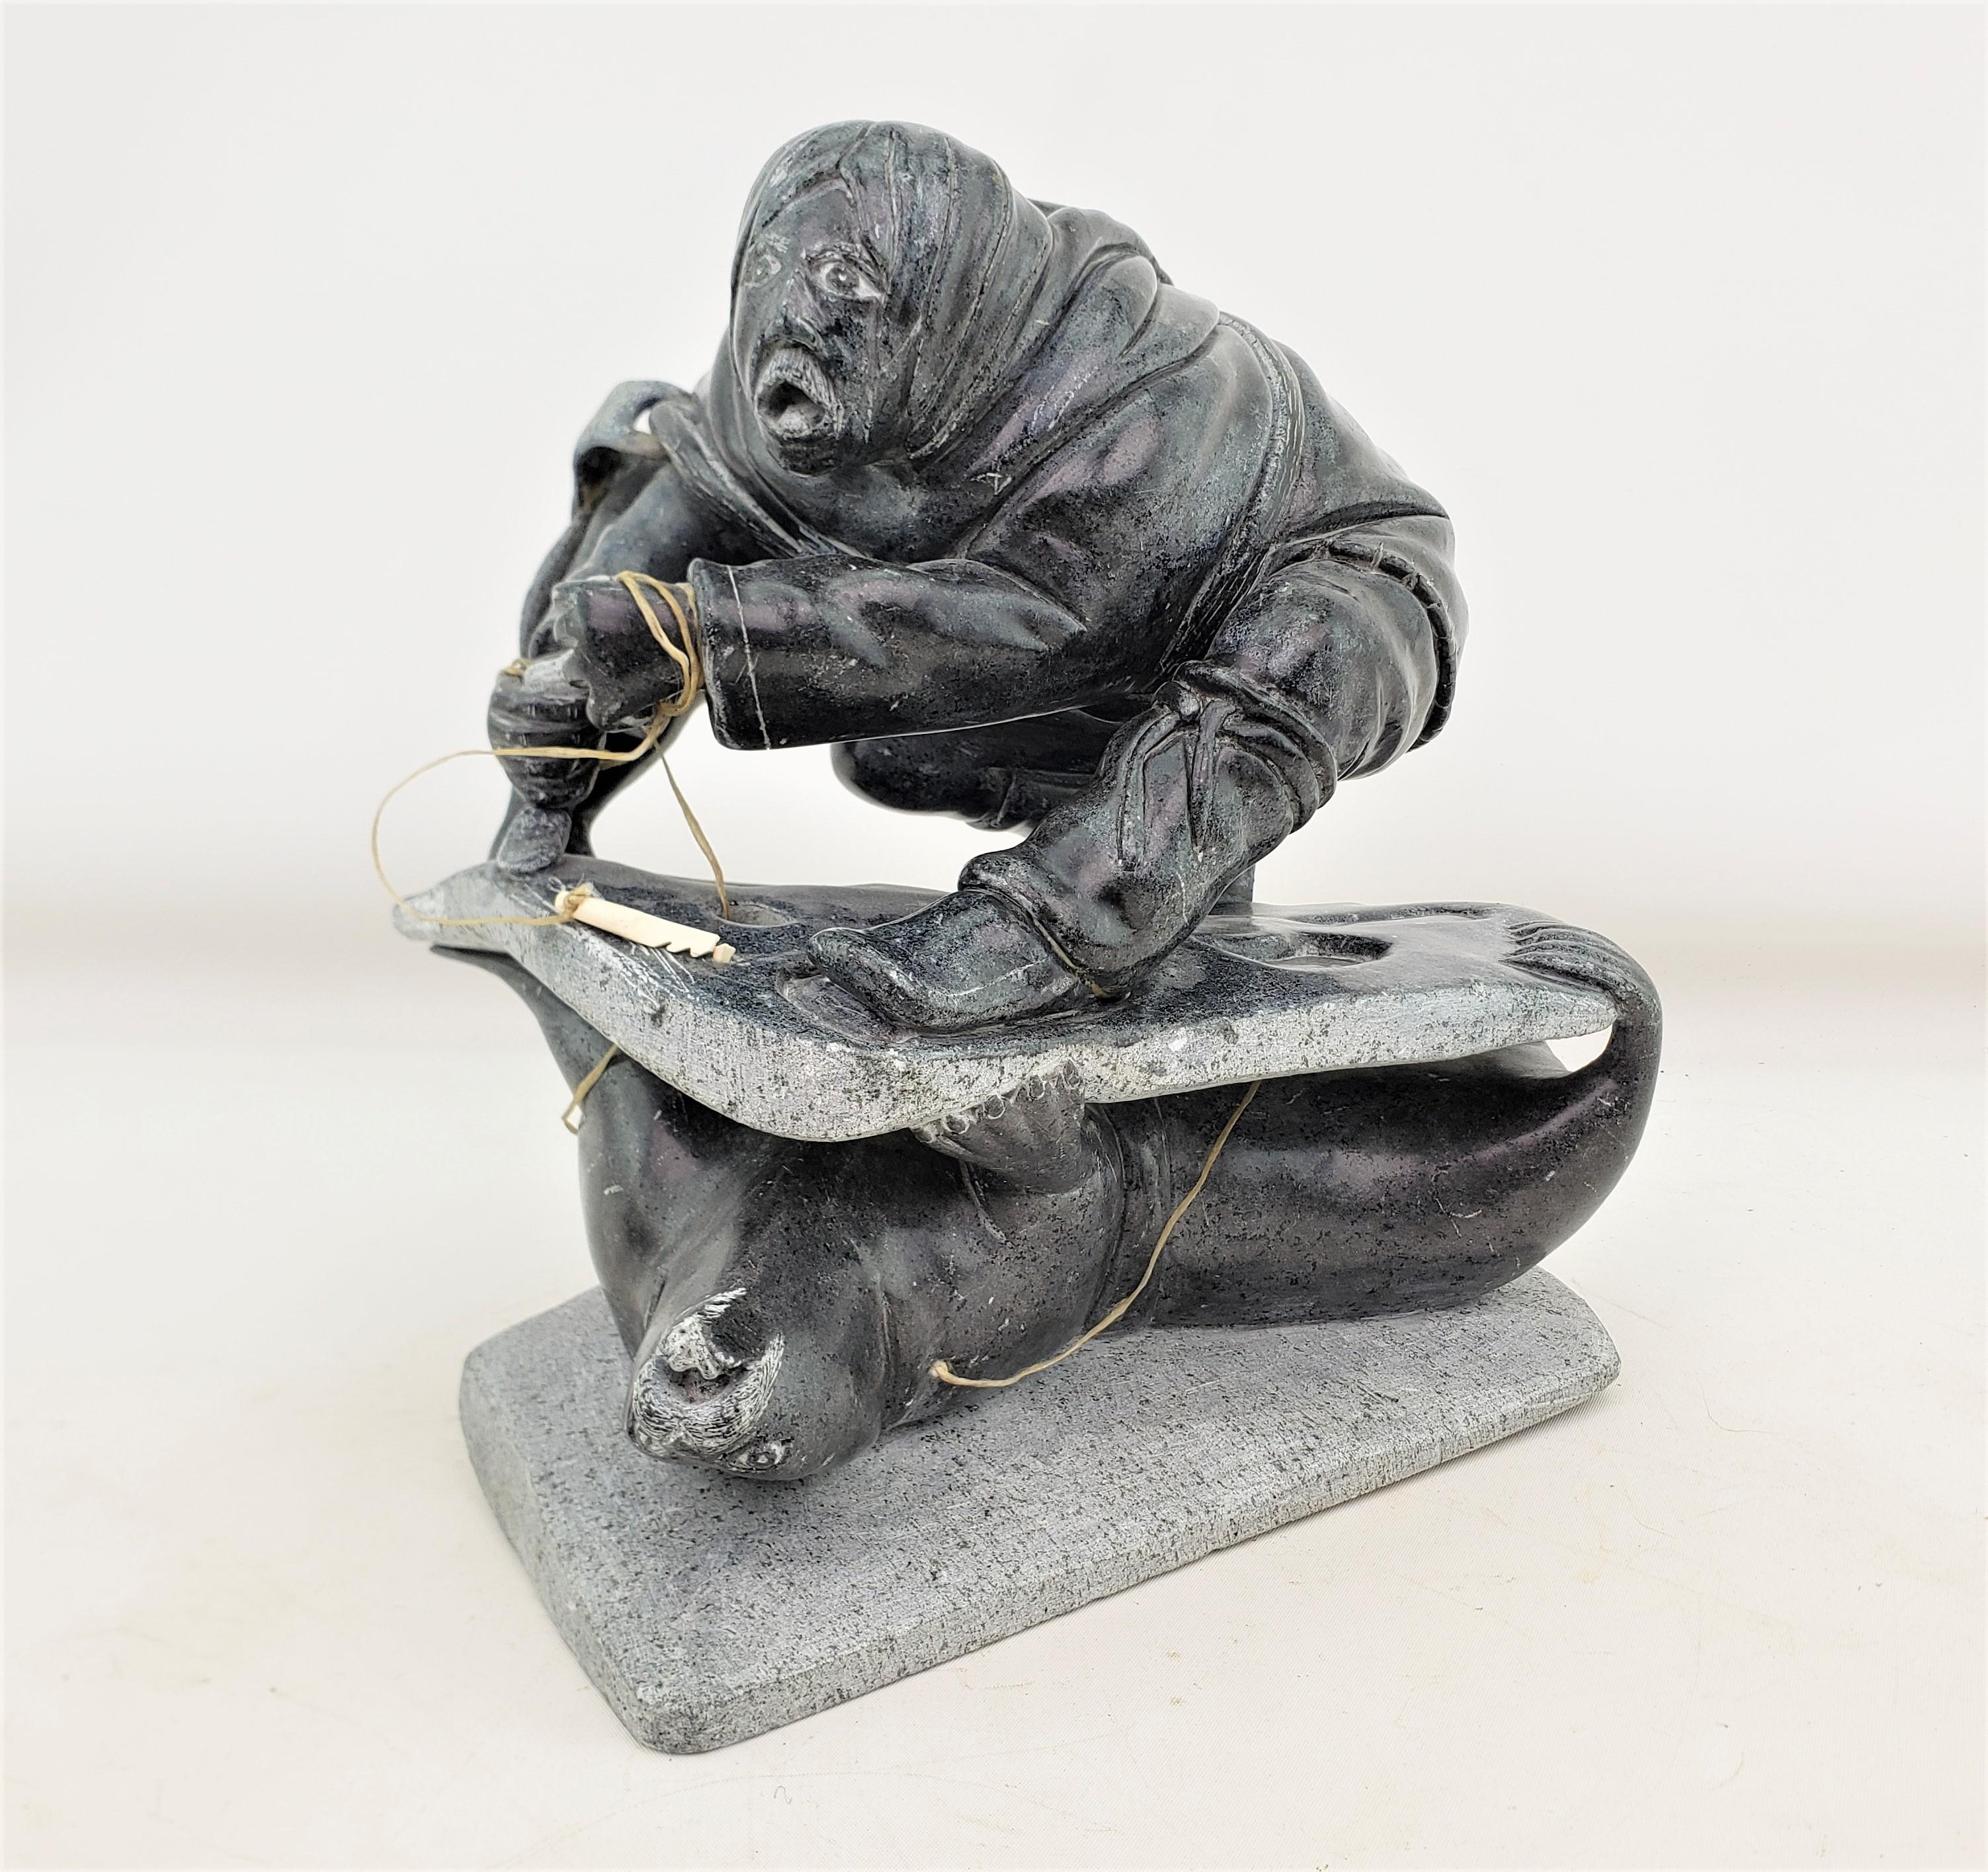 This large and well executed Inuit soapstone carving is signed by and unknown artist and dates to approximately 1977 and done in the period Inuit style. The carving is composed of soapstone with some leather accents and depicts a large Inuit man on